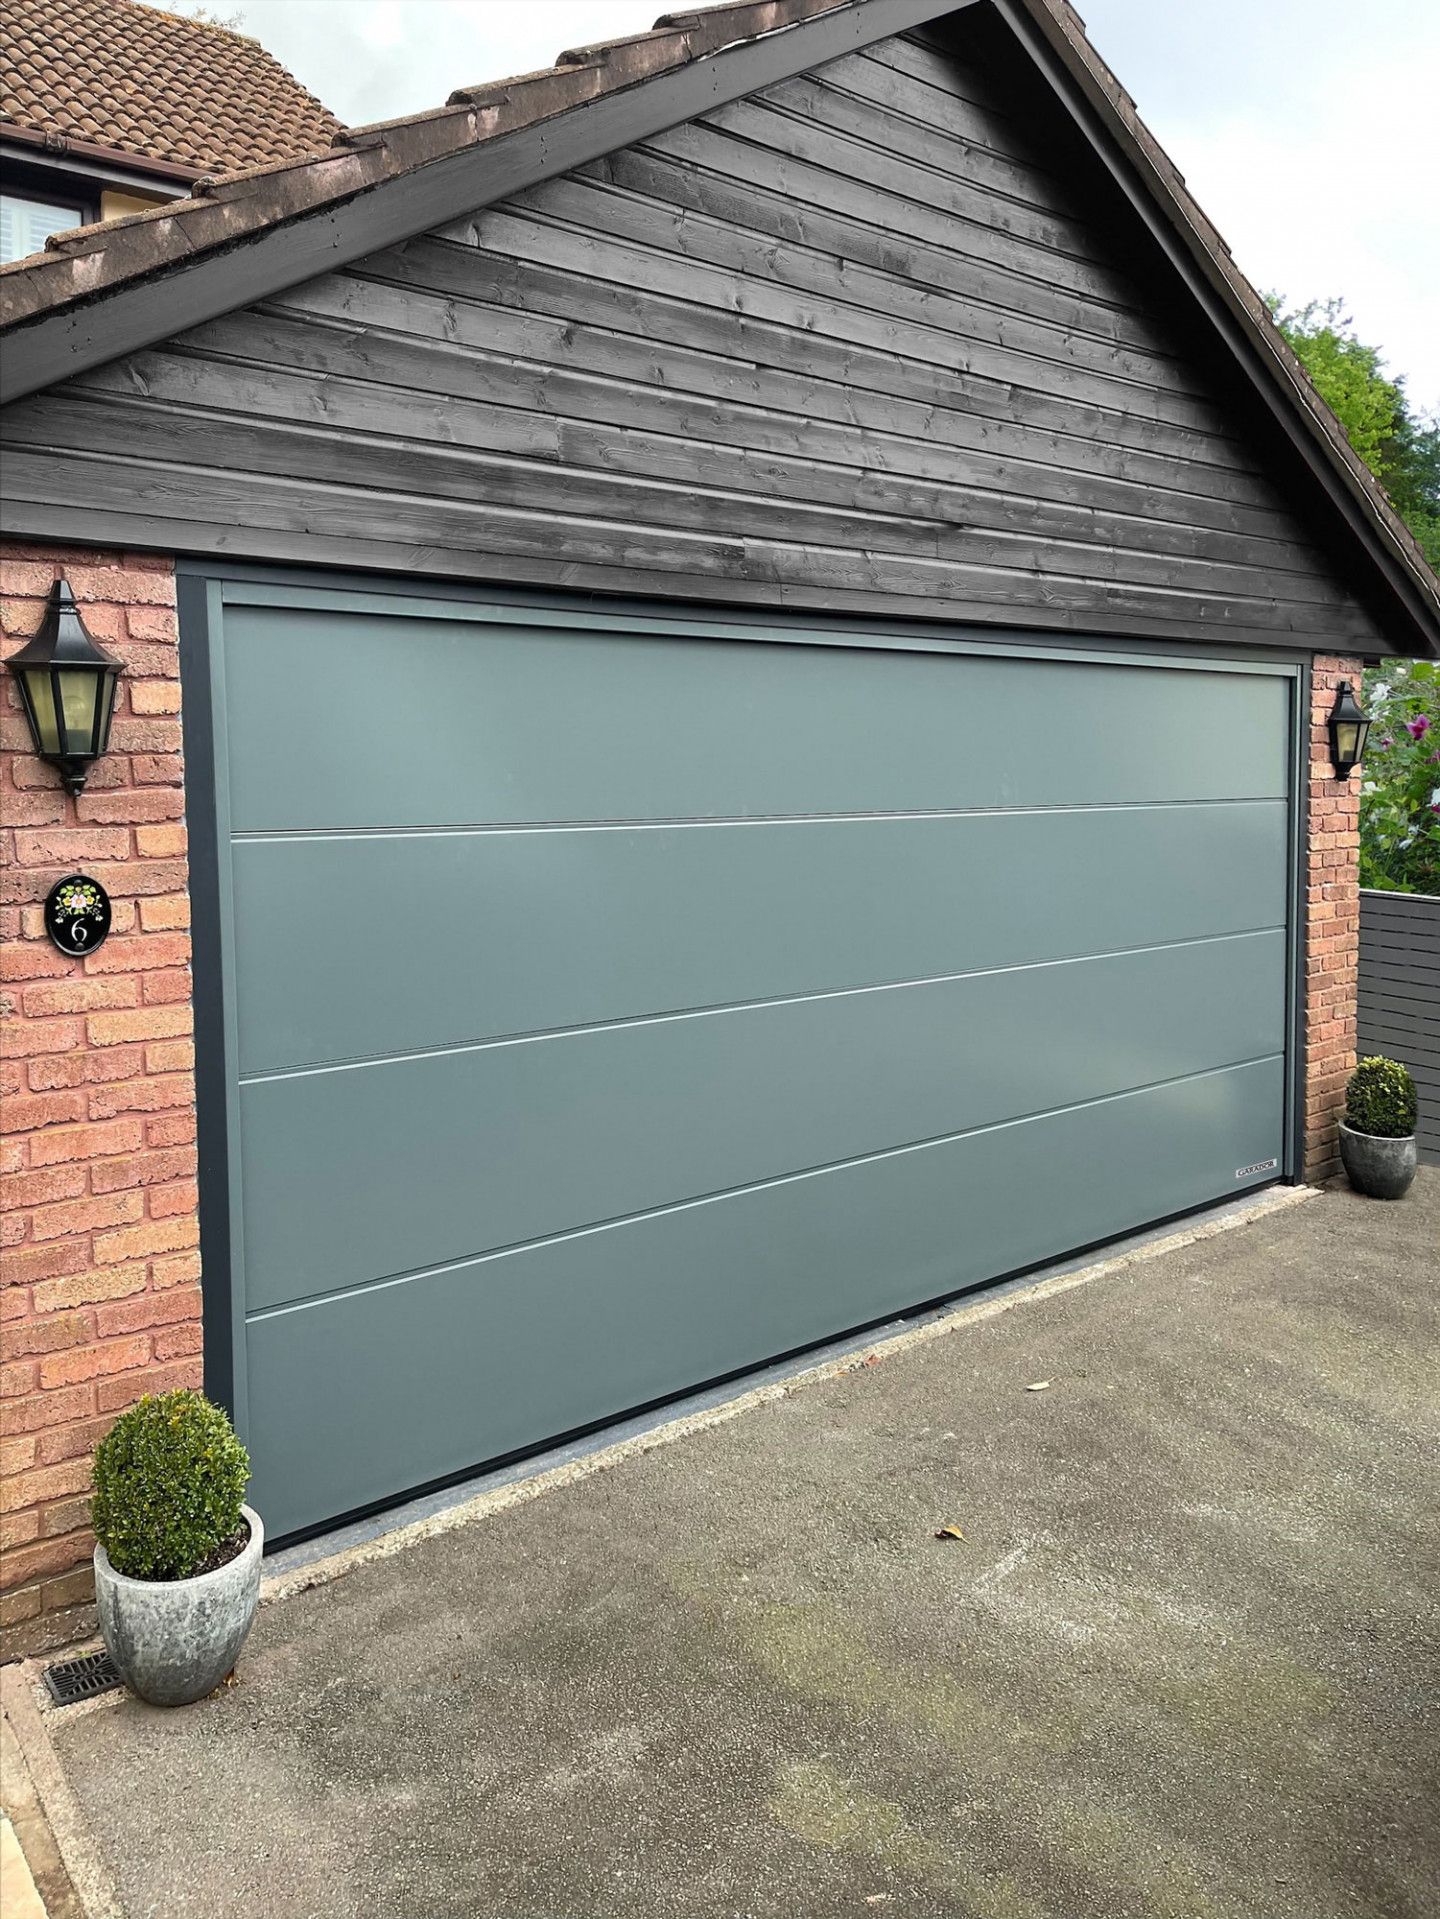 Servern Garage Doors services added a really stylish new look with an extra wide version of Garador’s Linear Large Sectional door.